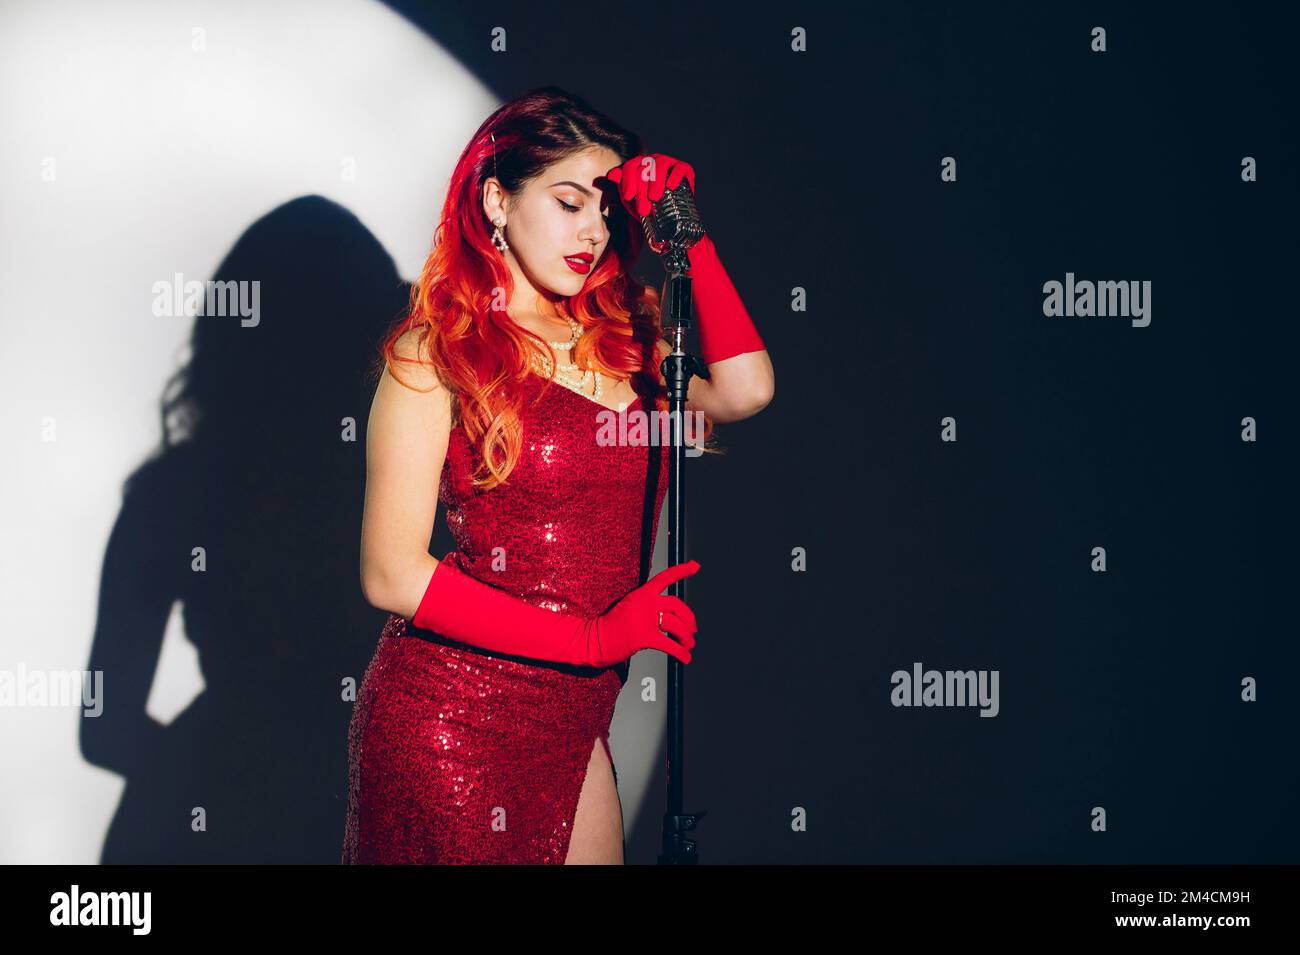 Pretty woman in red shiny dress with a red hair holding micropho Stock Photo